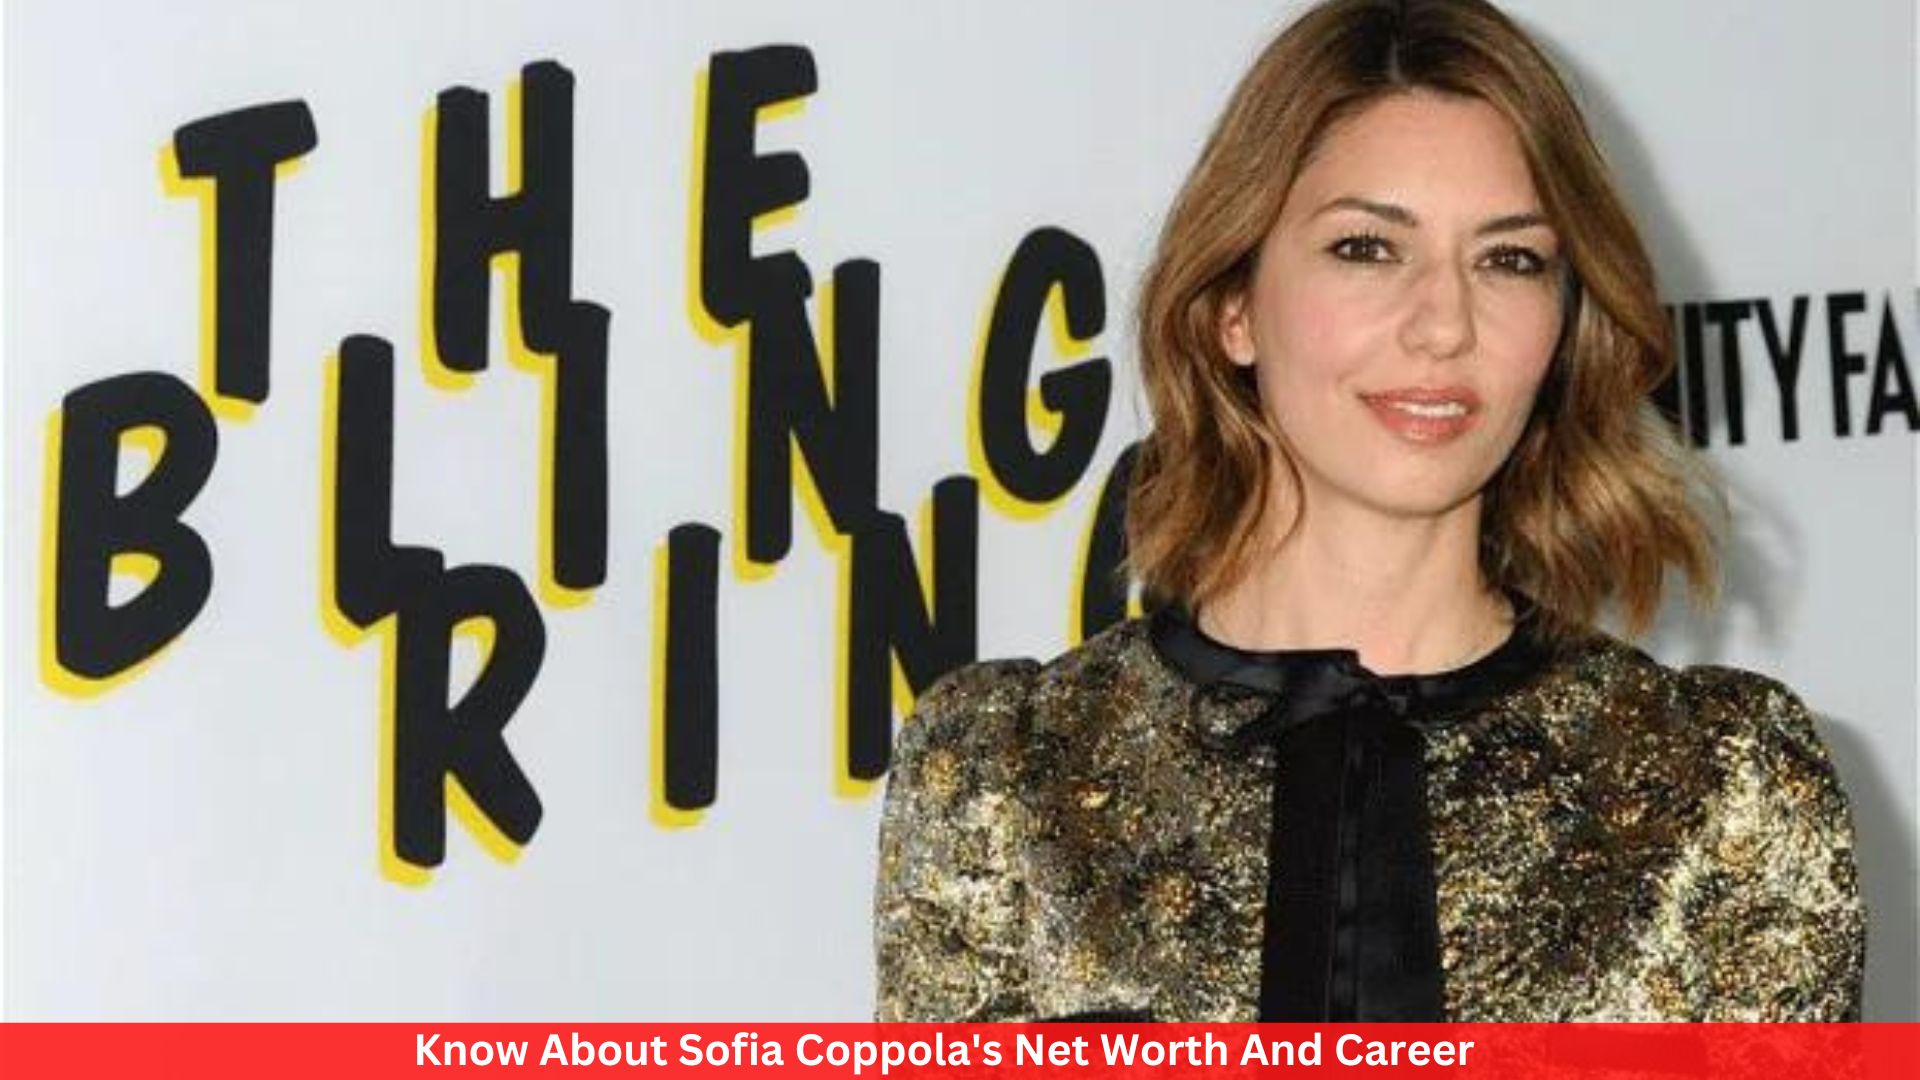 Know About Sofia Coppola's Net Worth And Career